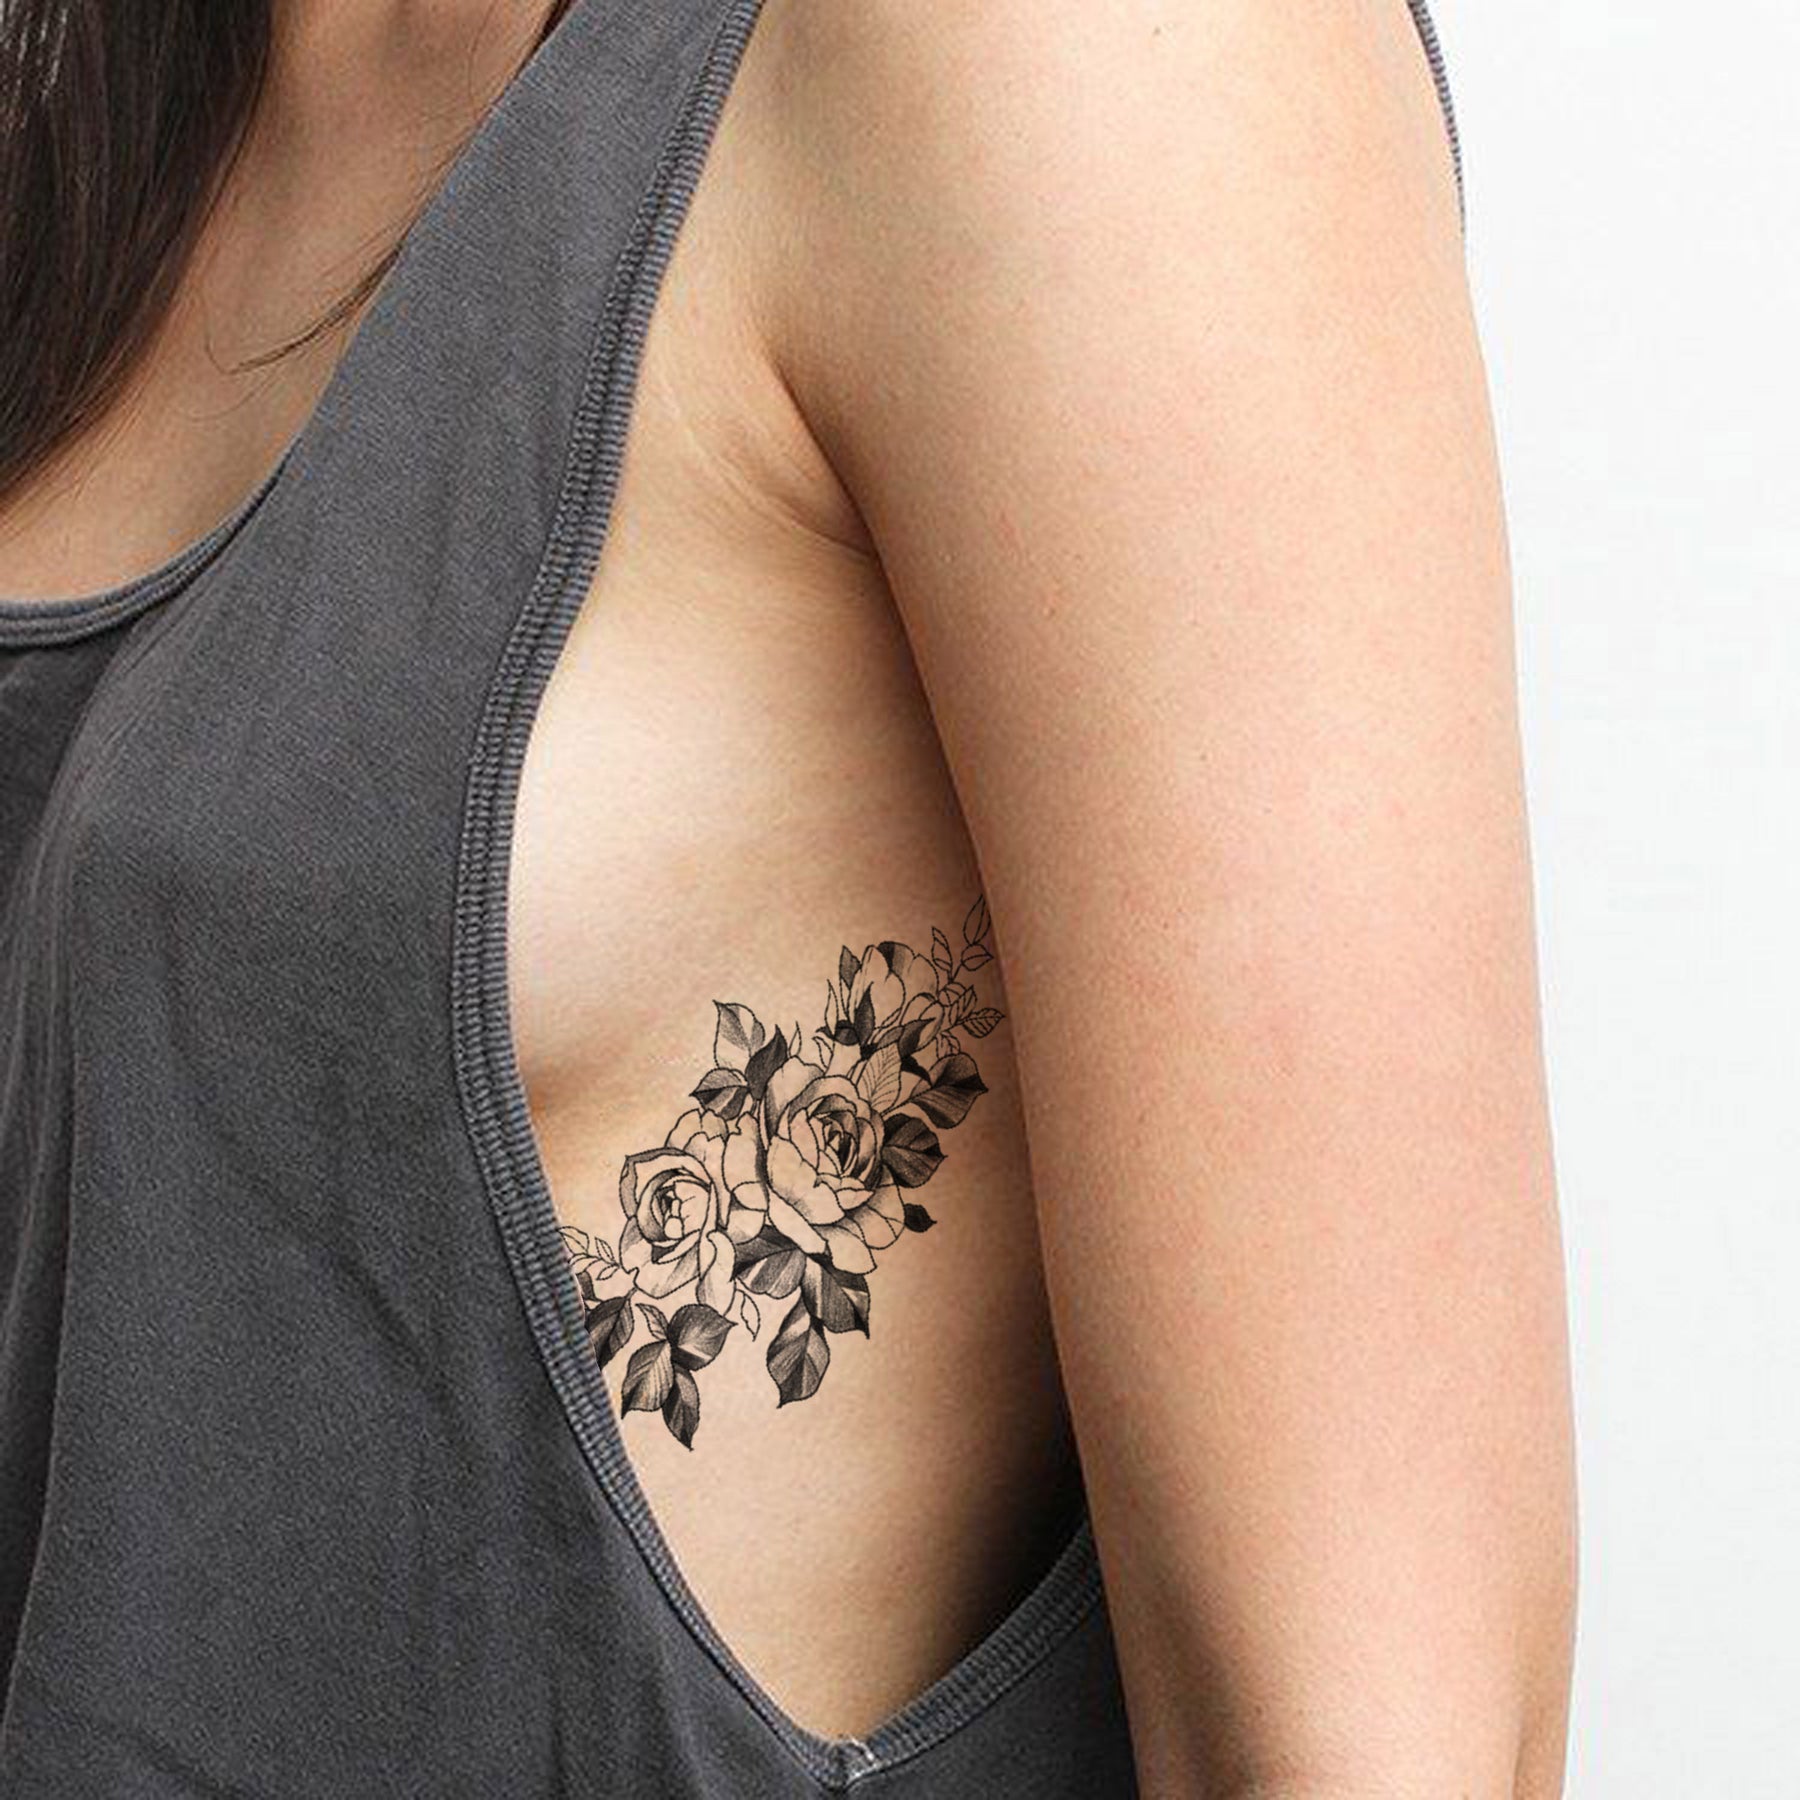 15 Top Rib Tattoo Ideas To Look Awesome